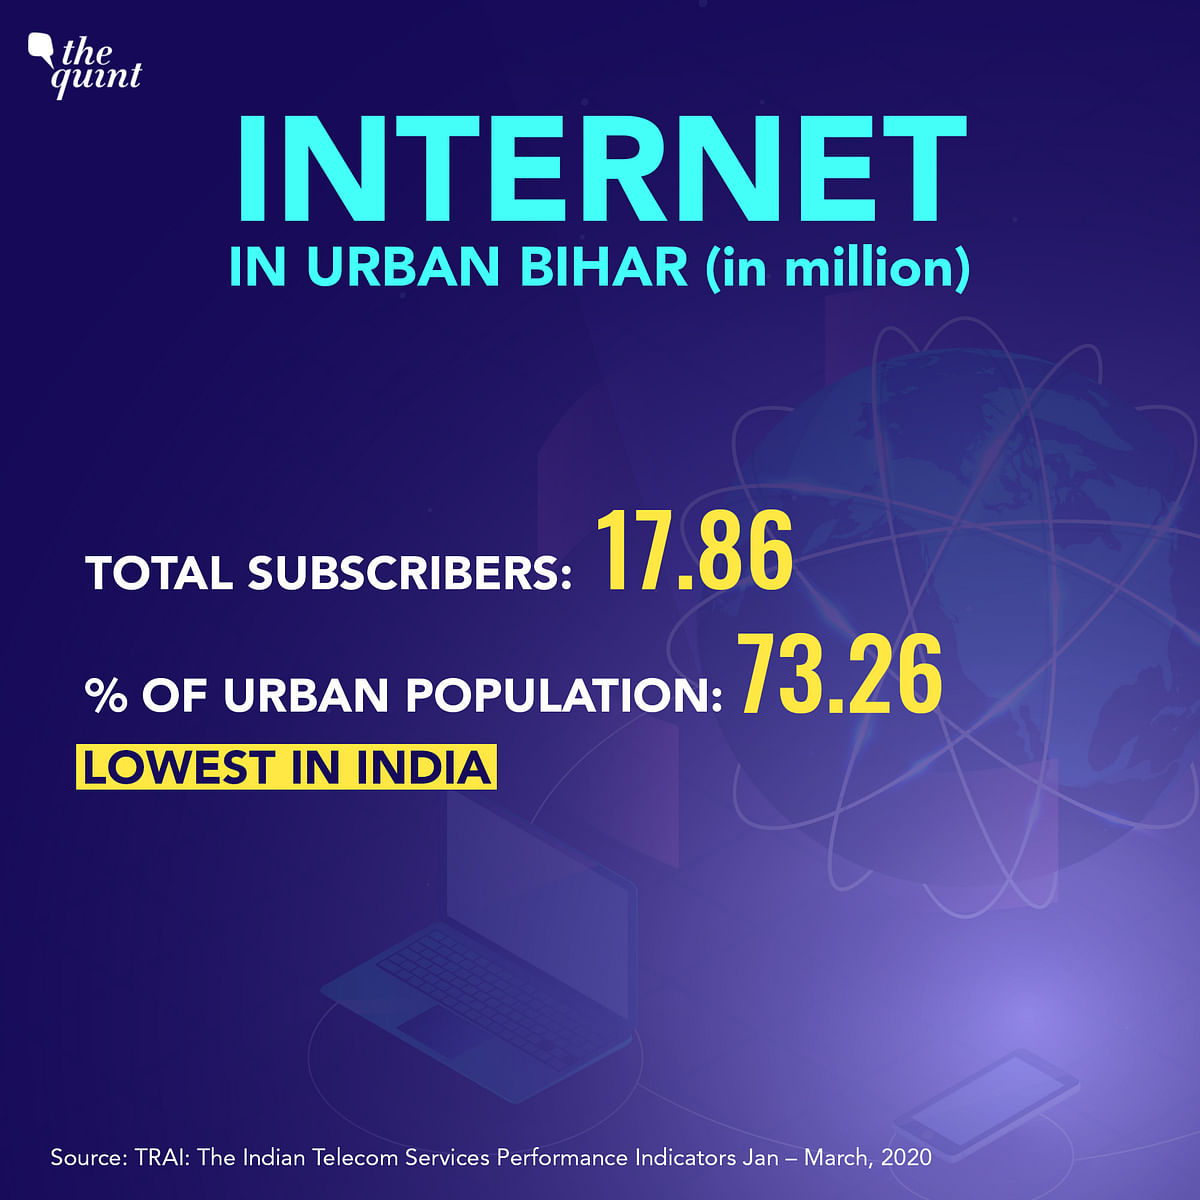 PM Narendra Modi inaugurated a project to connect all 45,945 villages of Bihar with optical fibre internet service.